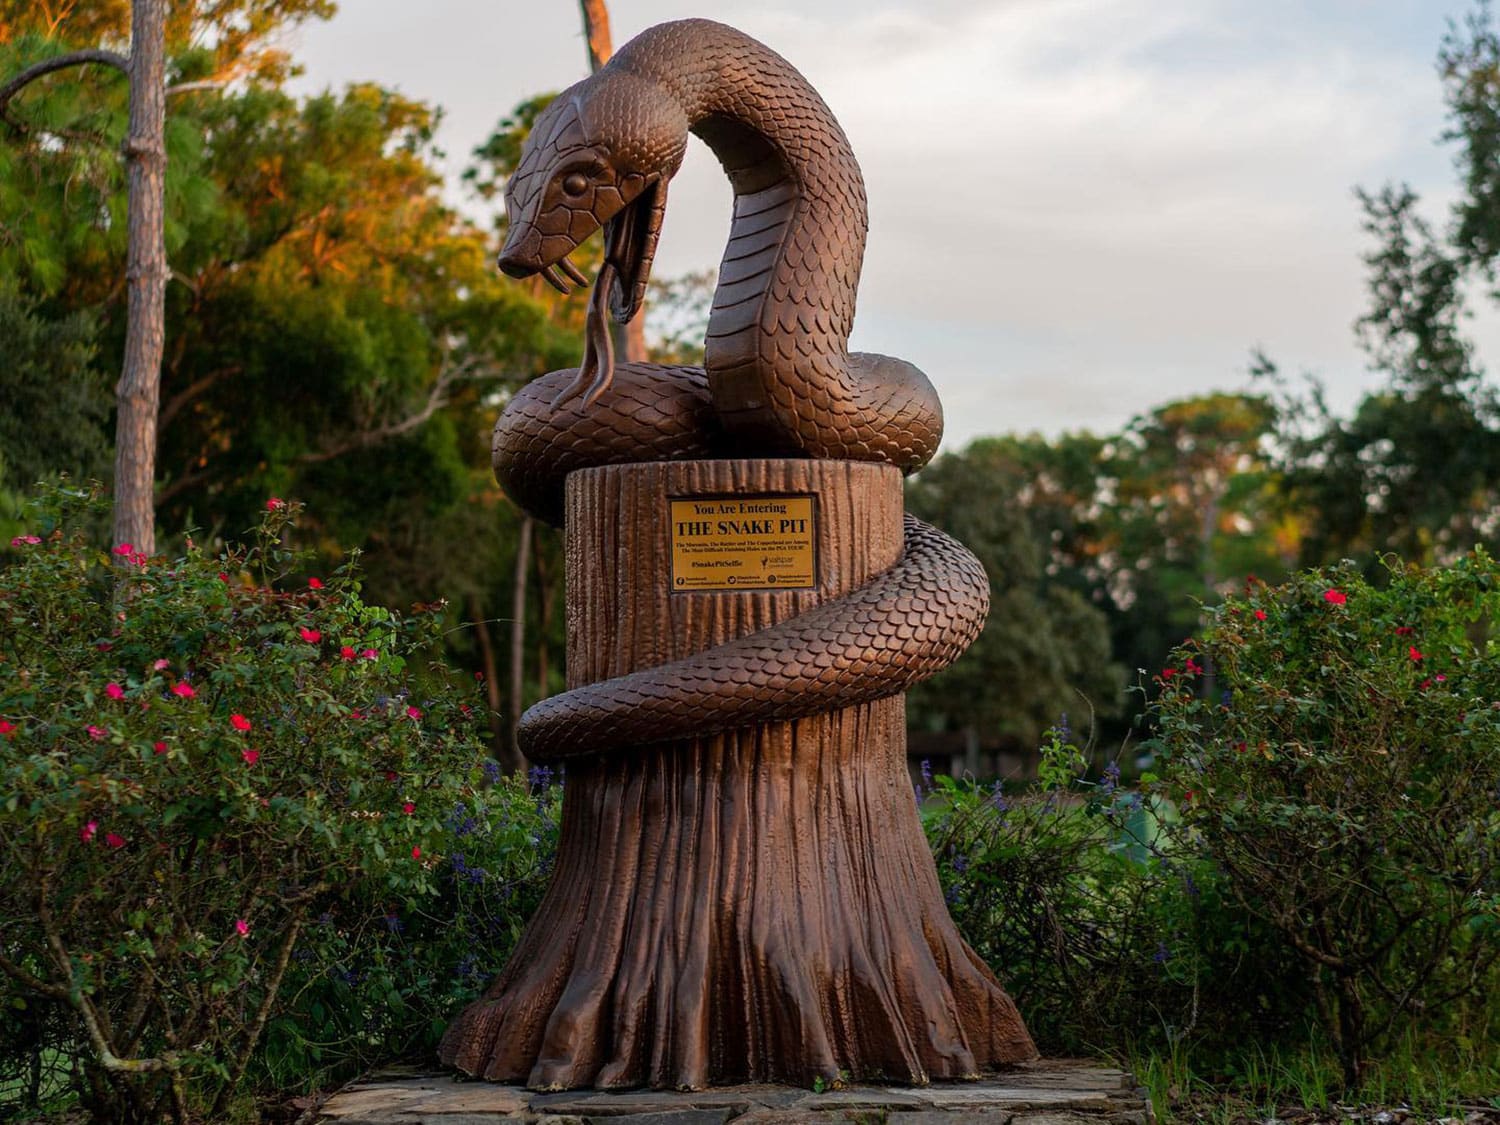 A decorative copperhead snake statue welcomes golfers to the 